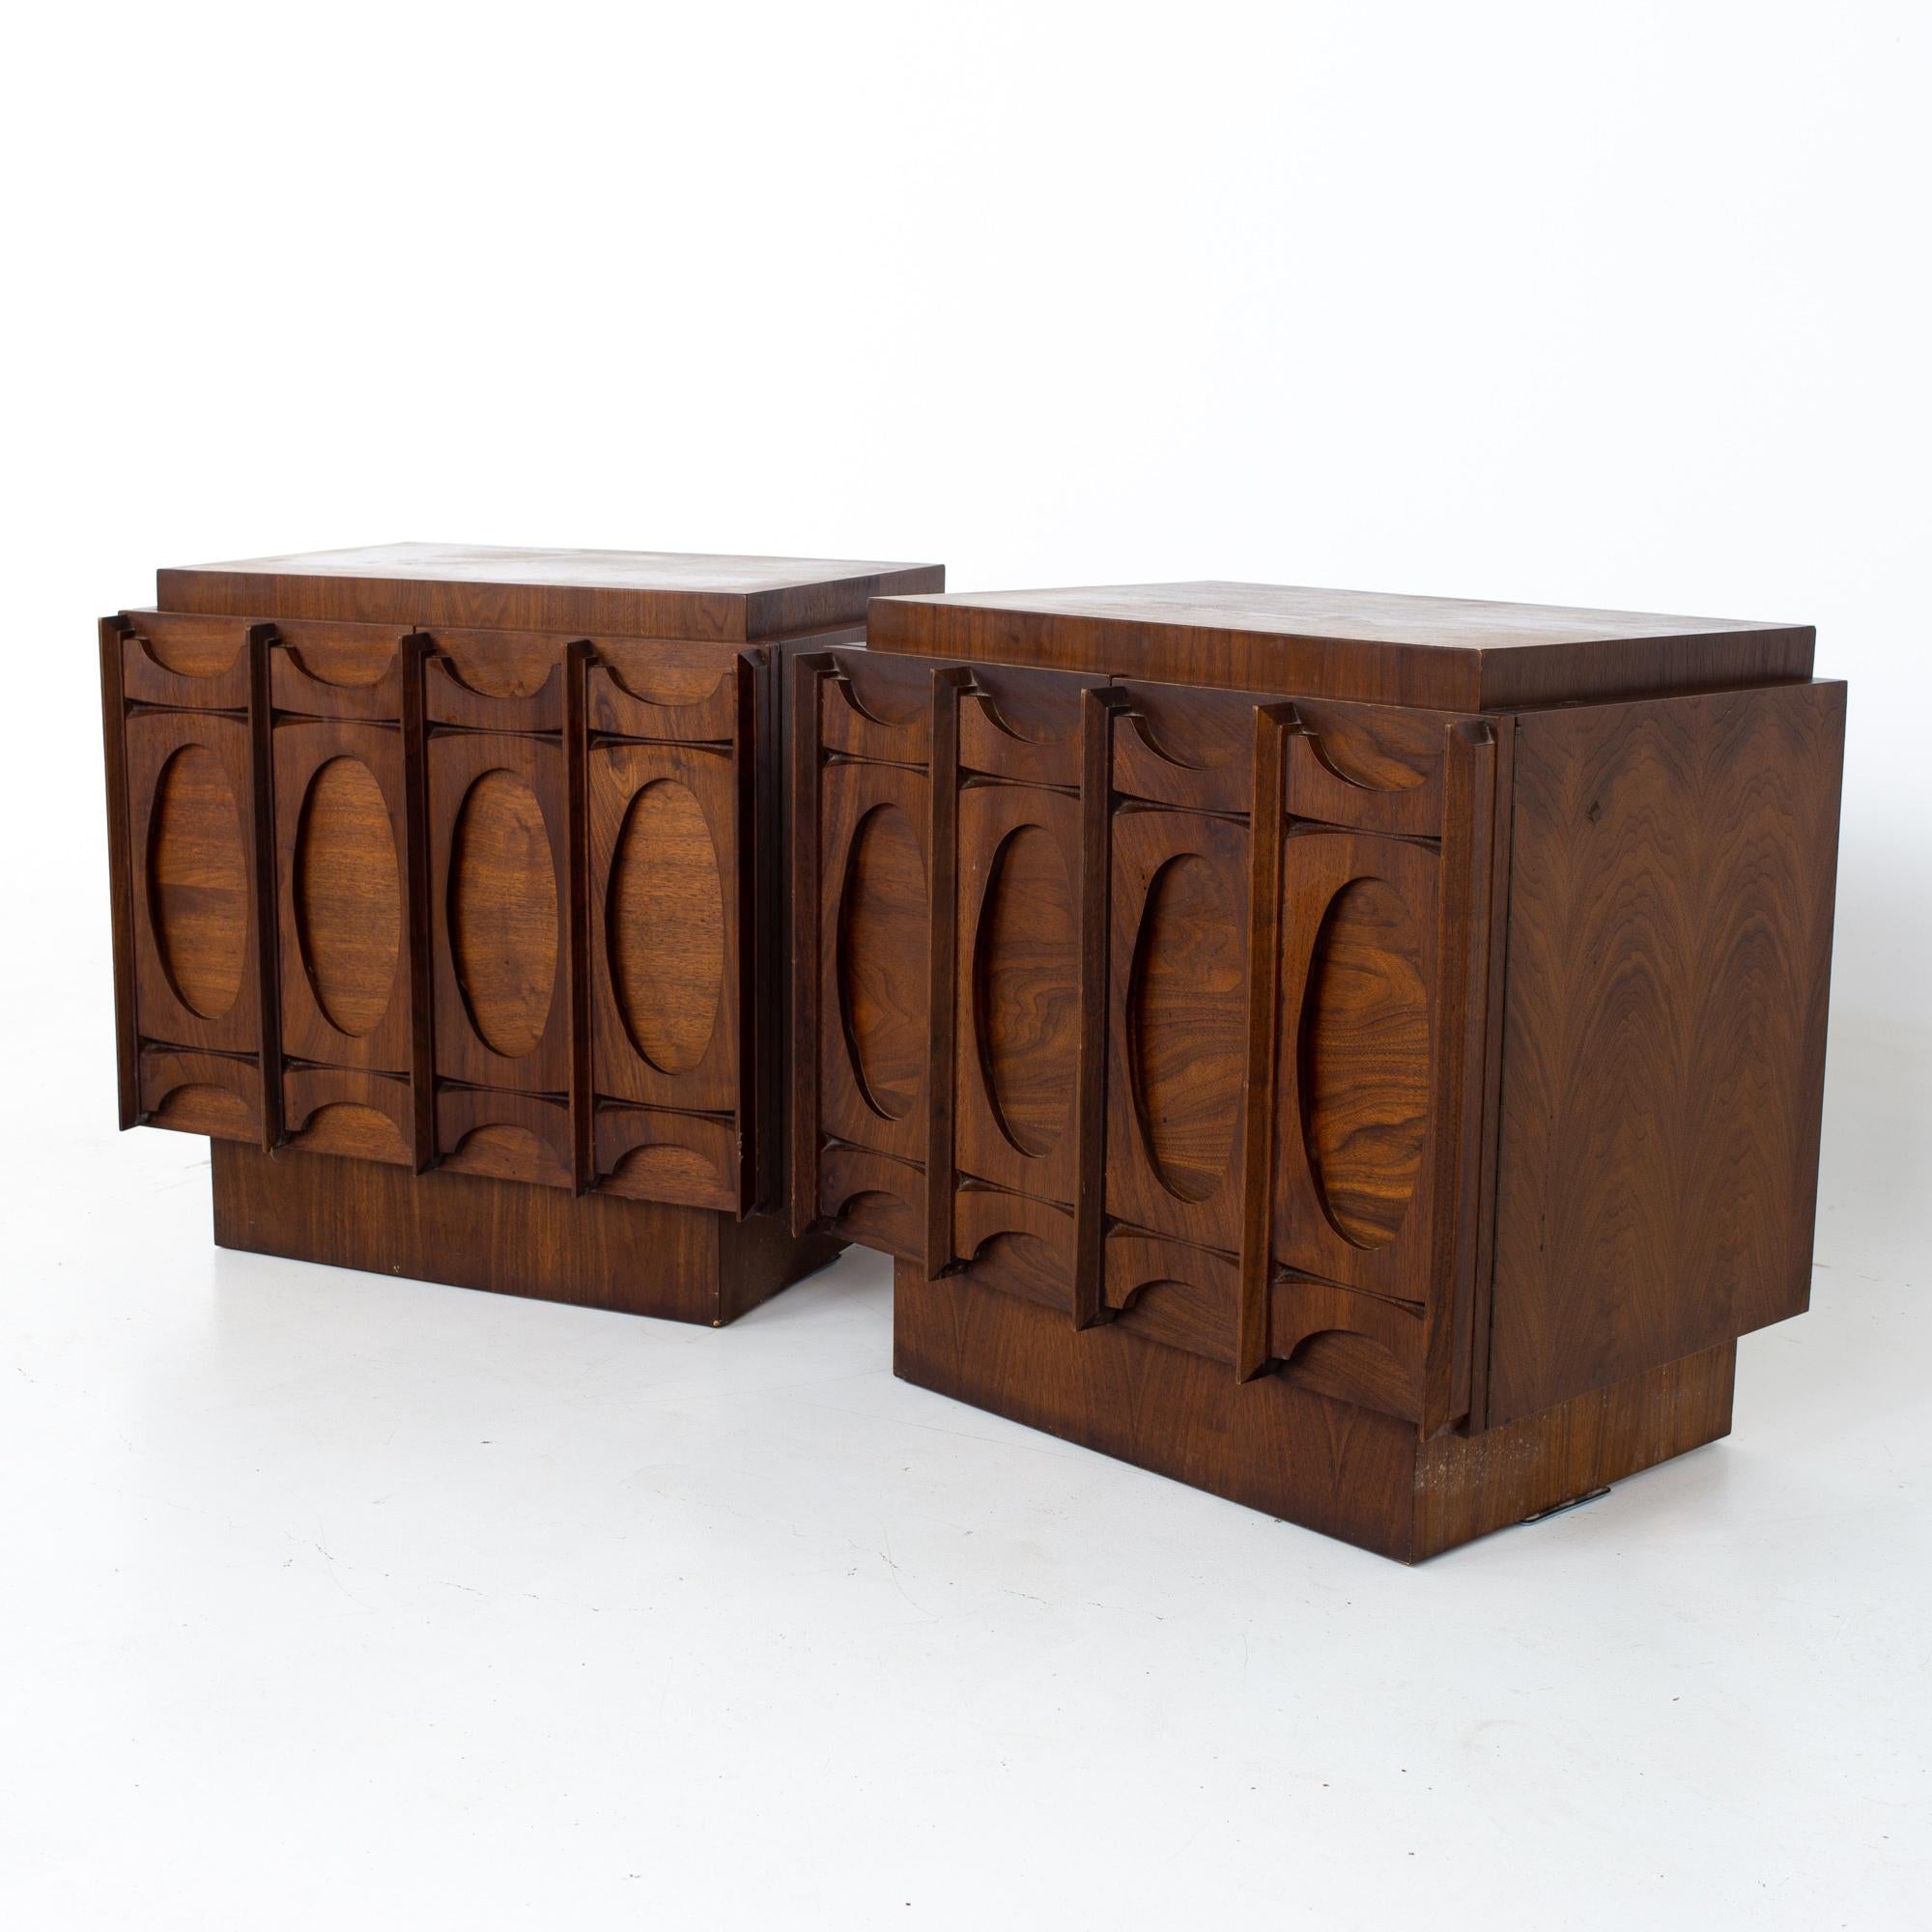 Tobago canadian mid century Brutalist nightstands - a pair
Each nightstand measures: 26 wide x 16 deep x 25.5 inches high

All pieces of furniture can be had in what we call restored vintage condition. That means the piece is restored upon